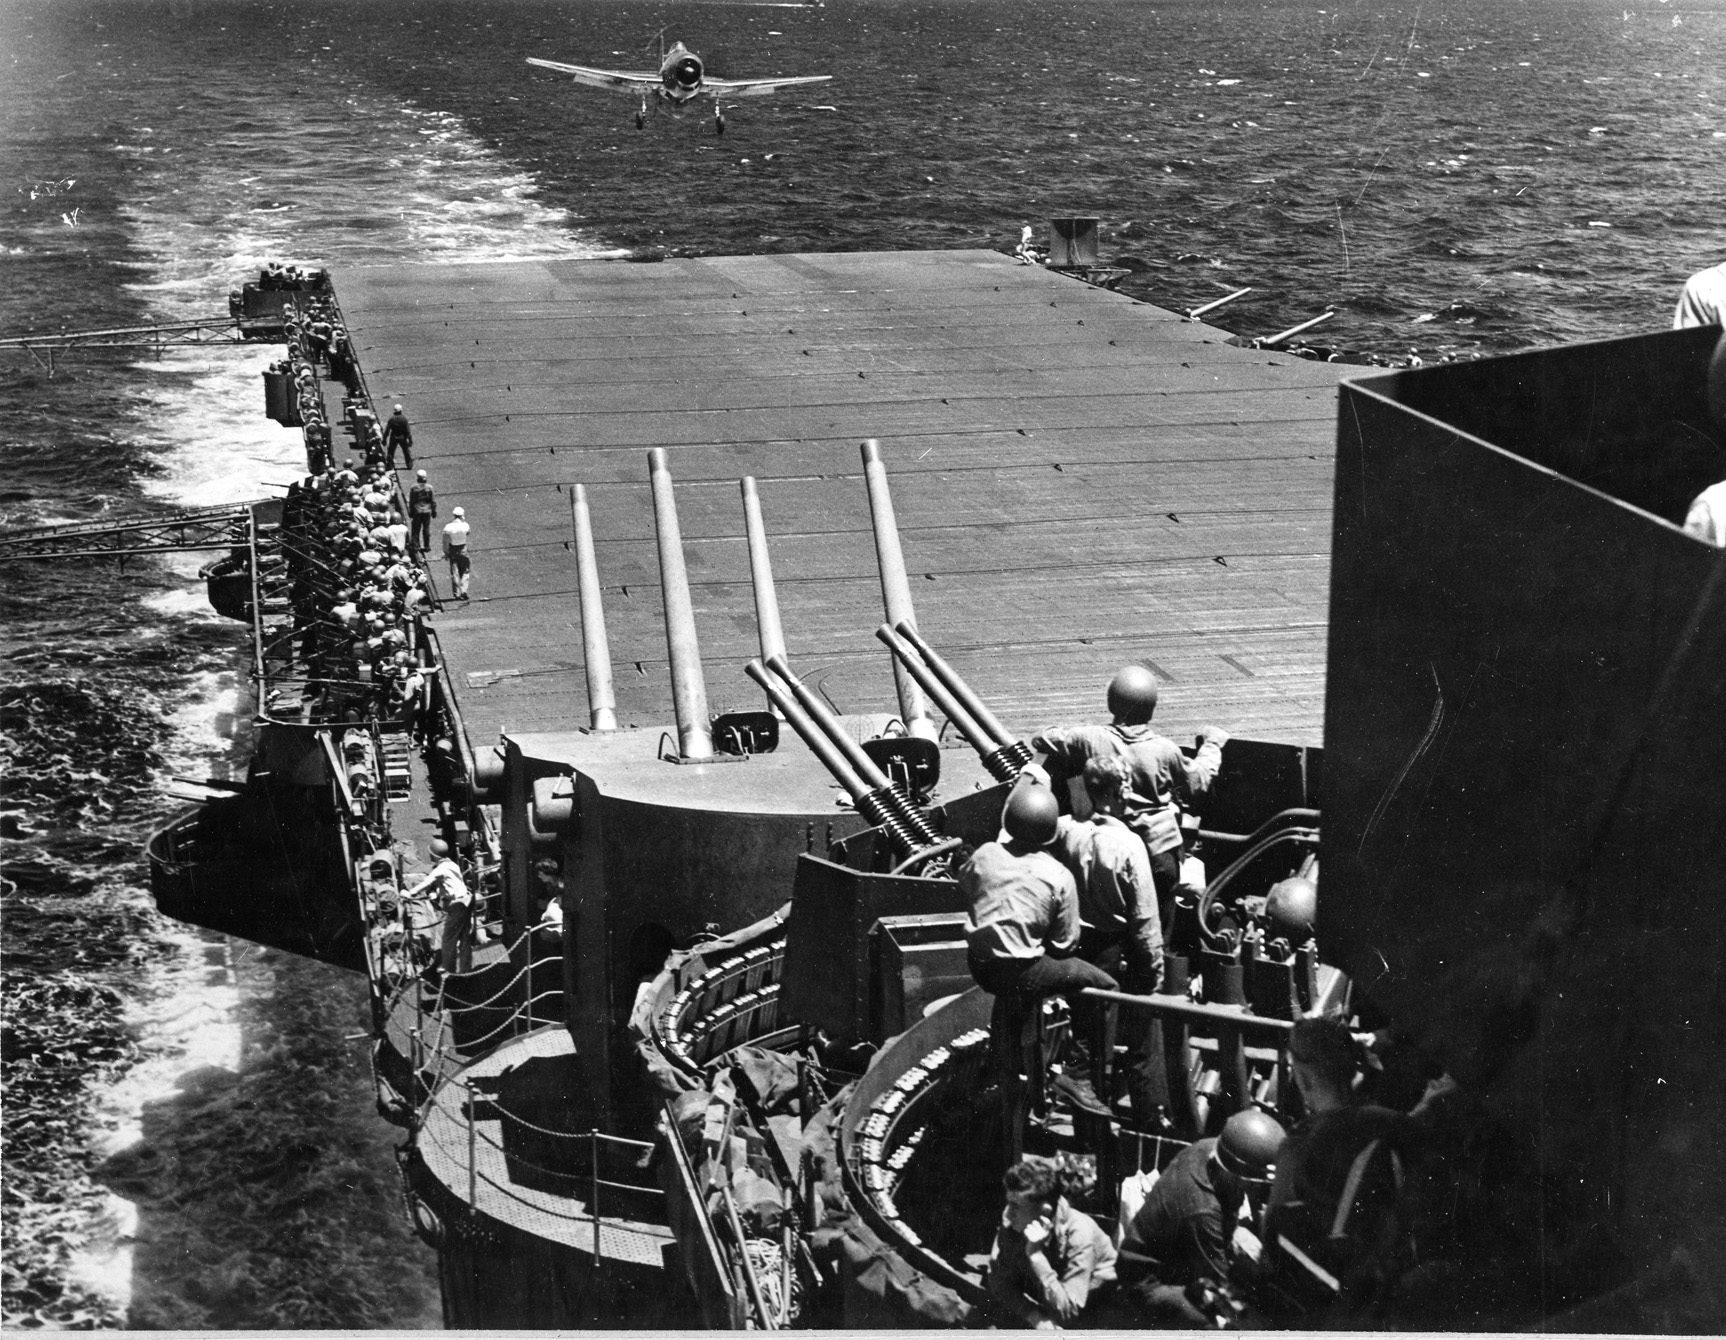 A Hellcat lands on the deck of the USS Lexington. The U.S. Navy knocked out Japanese land-based aircraft on the Marianas Island before the battle, which put the Japanese at an even more severe disadvantage when the ship-to-ship fighting began.